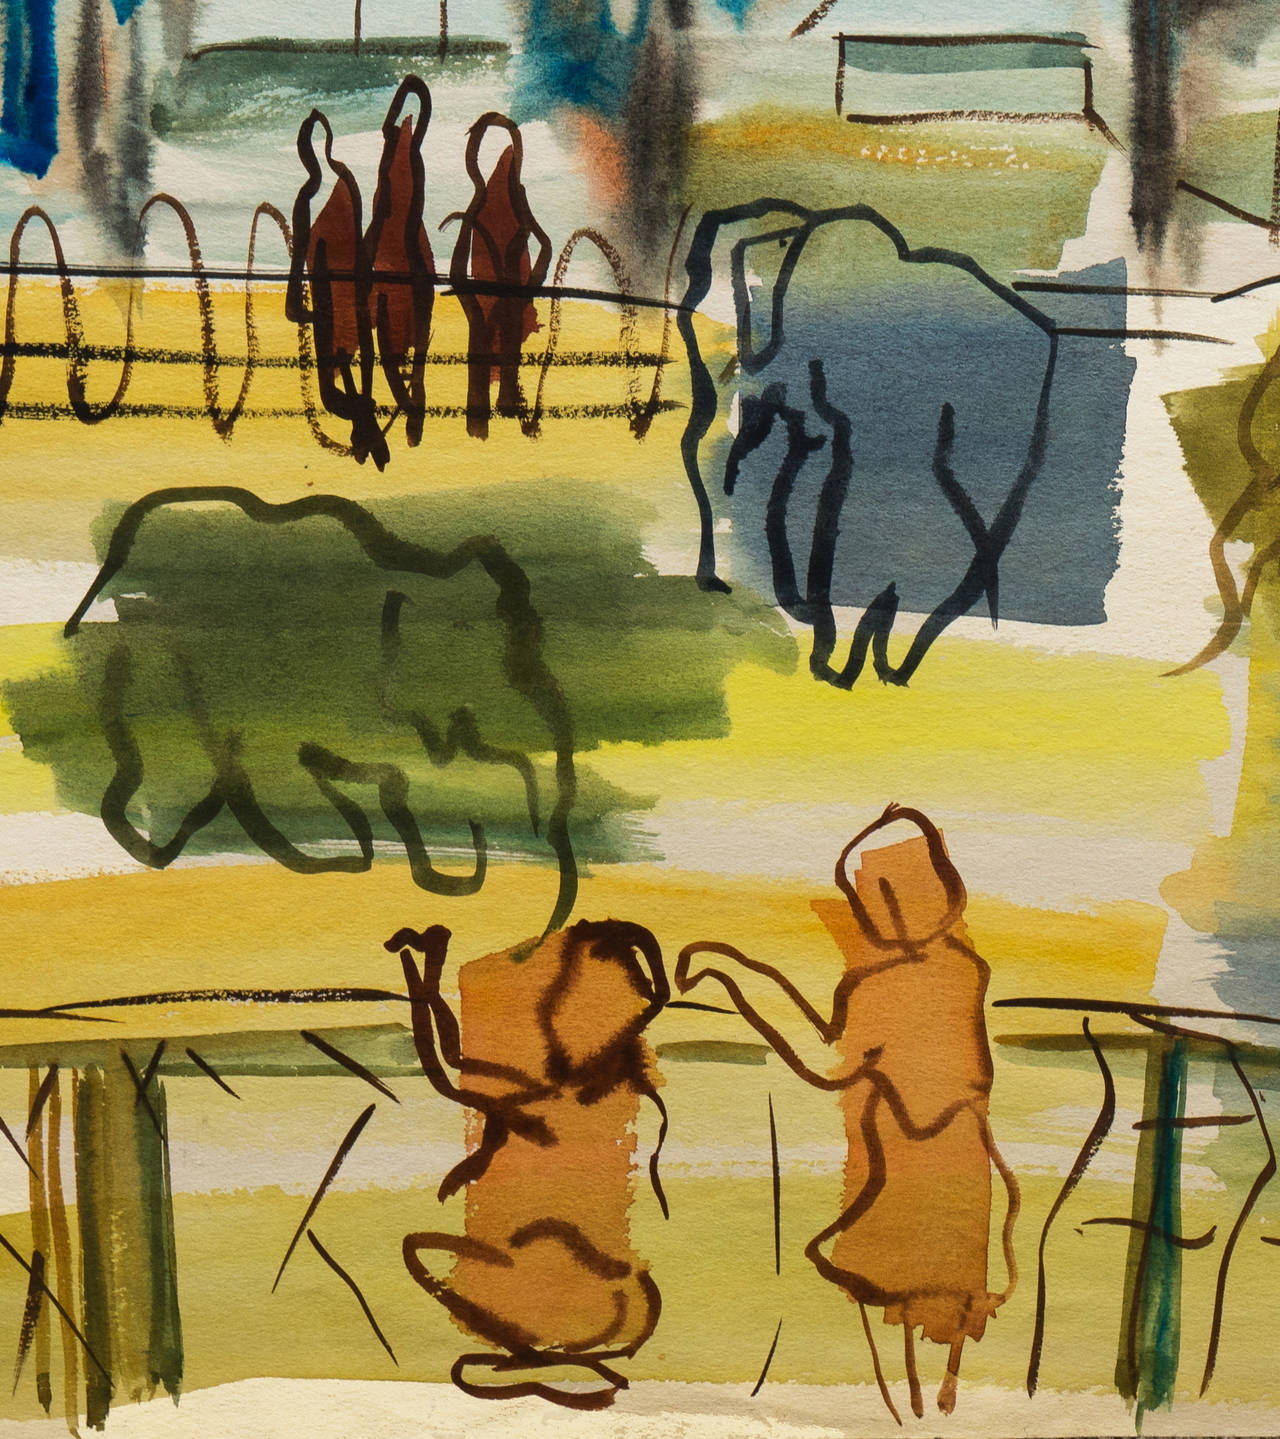 A substantial mid-century watercolor showing a view of a zoo with visitors viewing the elephant enclosure. An exuberant Modernist work by this notable California woman artist. Signed lower right 